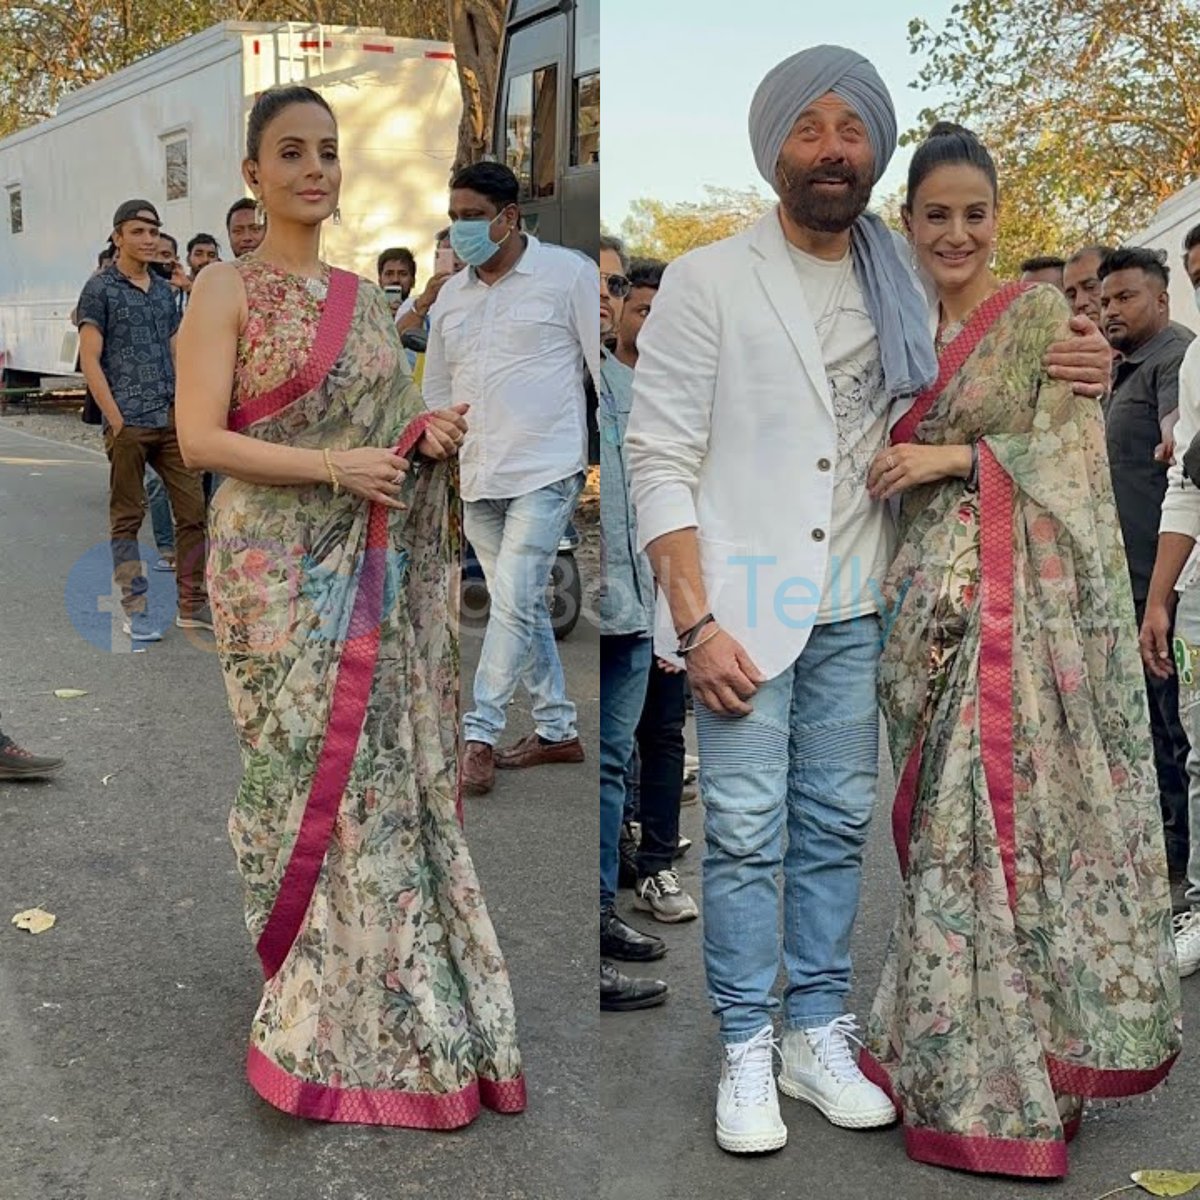 #BiggBoss16 Grand Finale LIVE UPDATES | #SunnyDeol and #AmeeshaPatel were seen promoting '#Gadar2' on the sets of 'BB 16' in Filmcity, Goregaon today
.
.
#BB16 | #BiggBoss | #BiggBoss16Finale | #BB16Finale